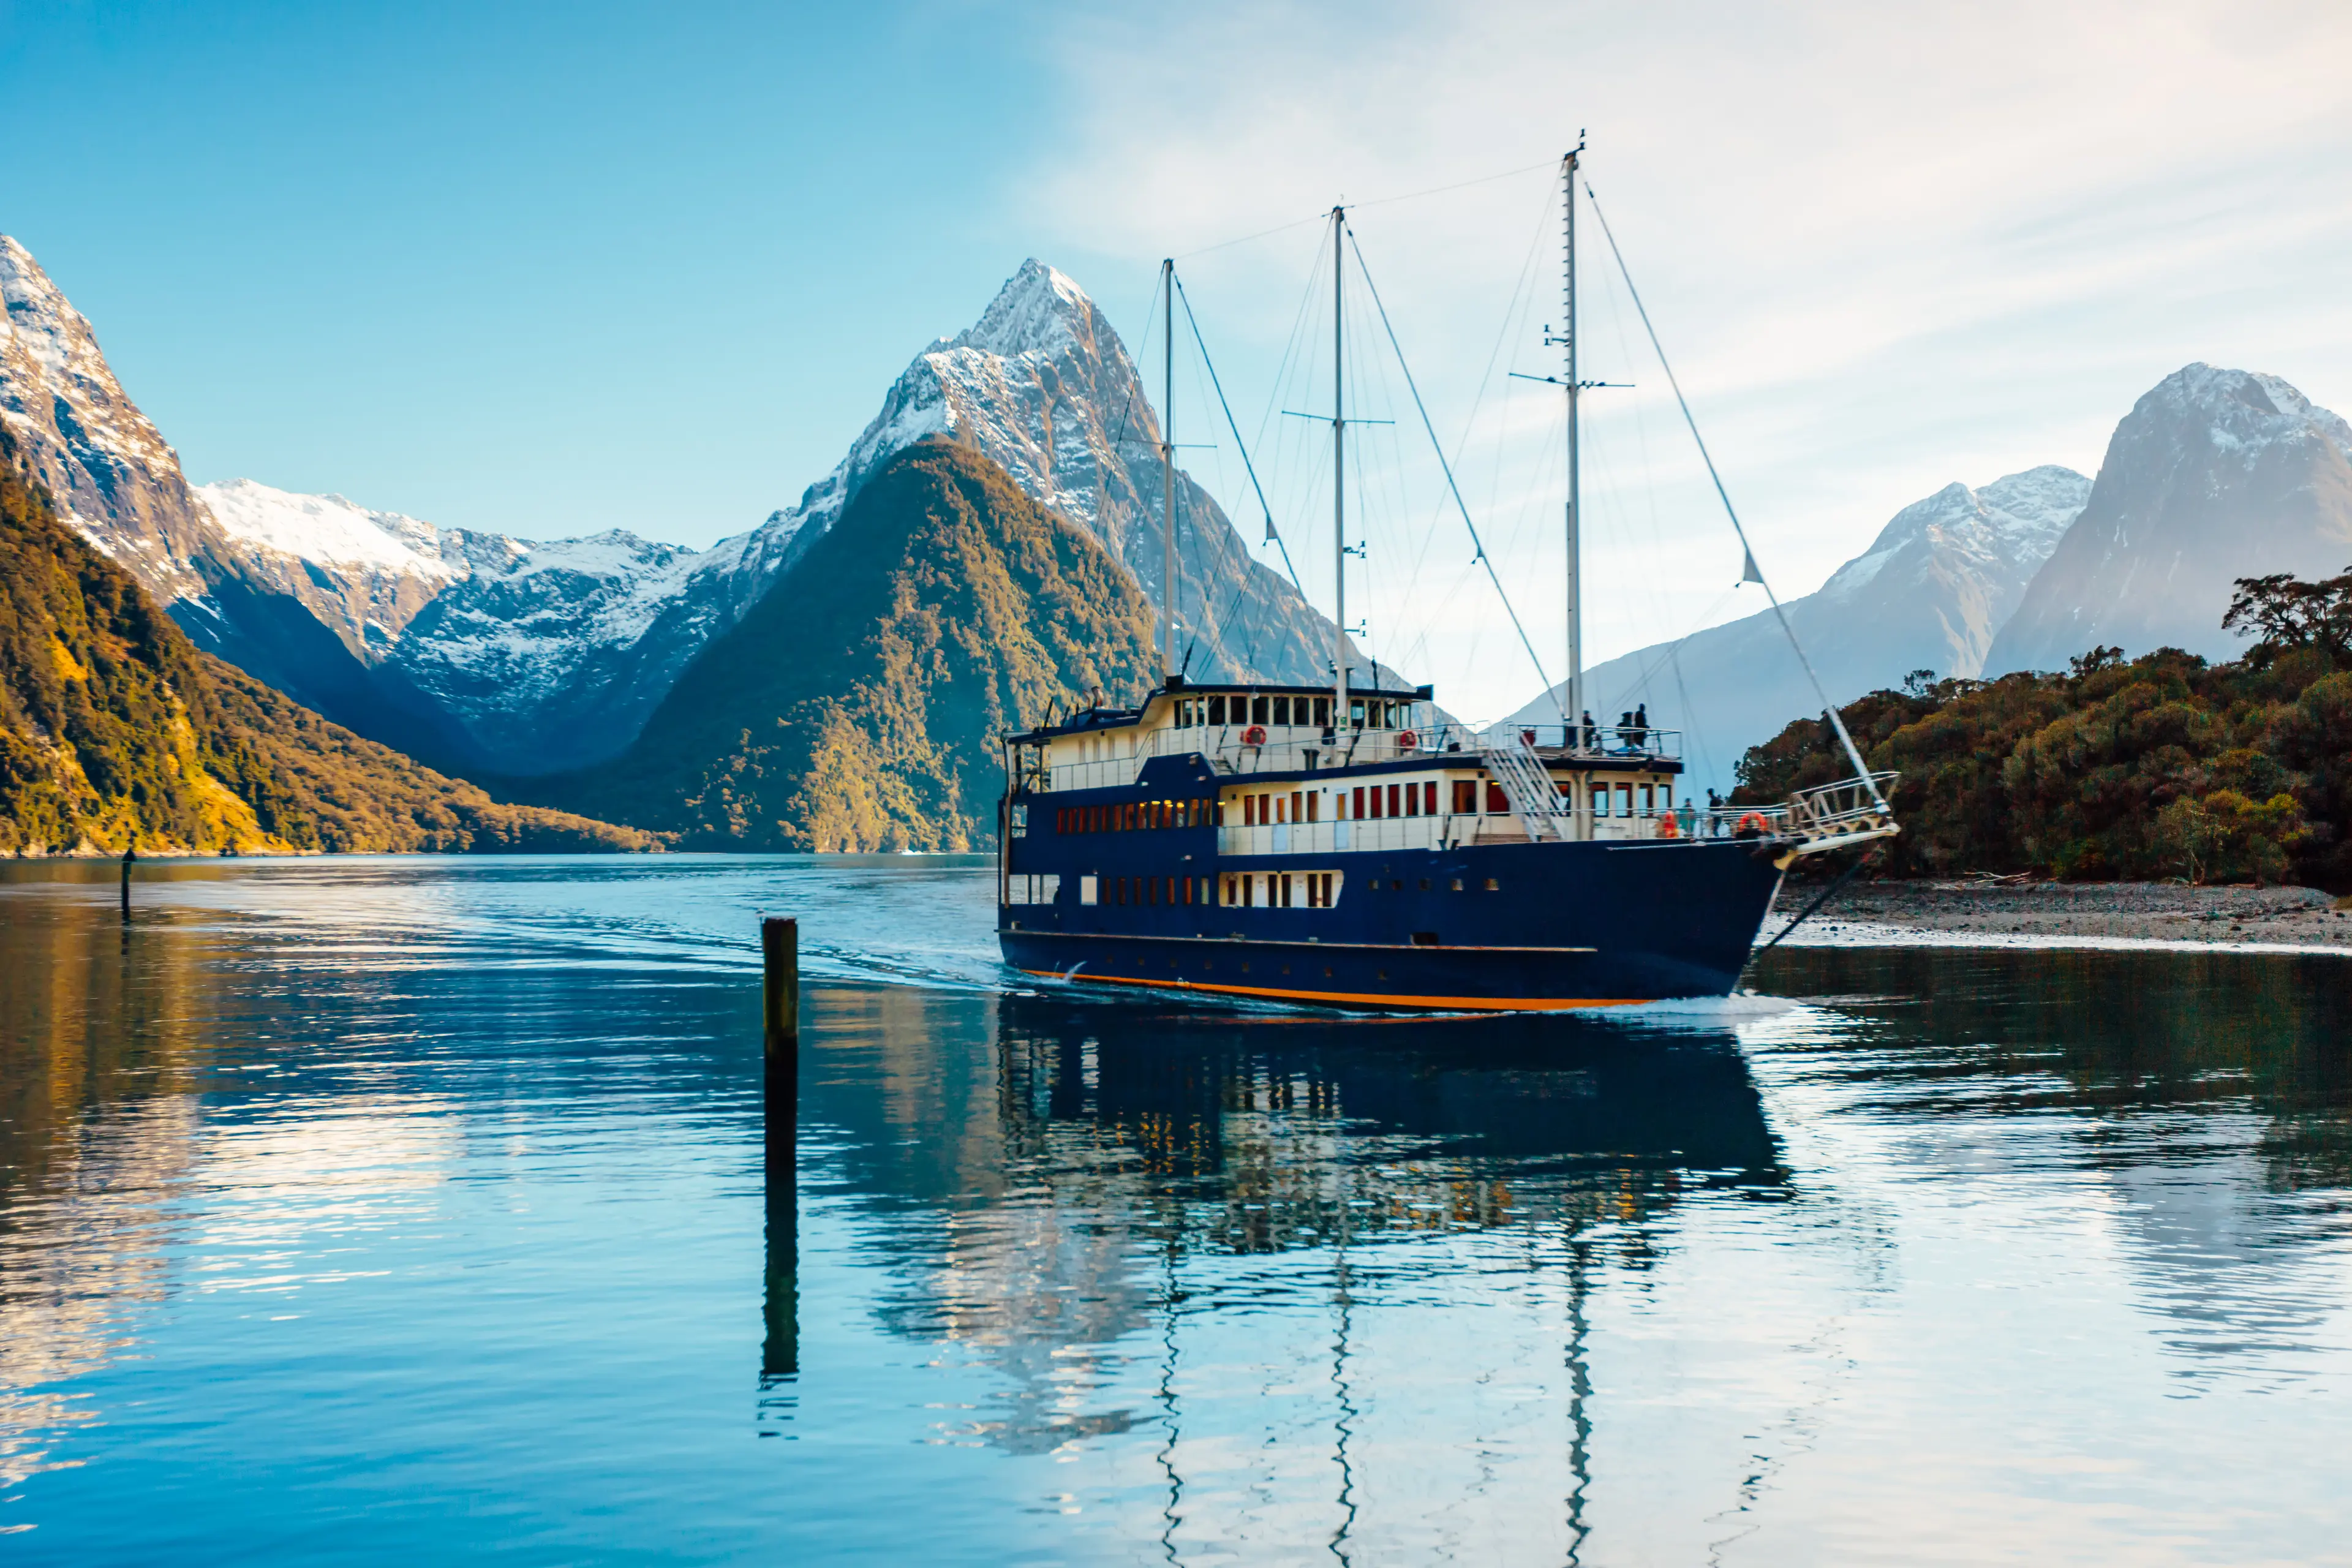 1-Day Romantic Adventure and Relaxation in Milford Sound